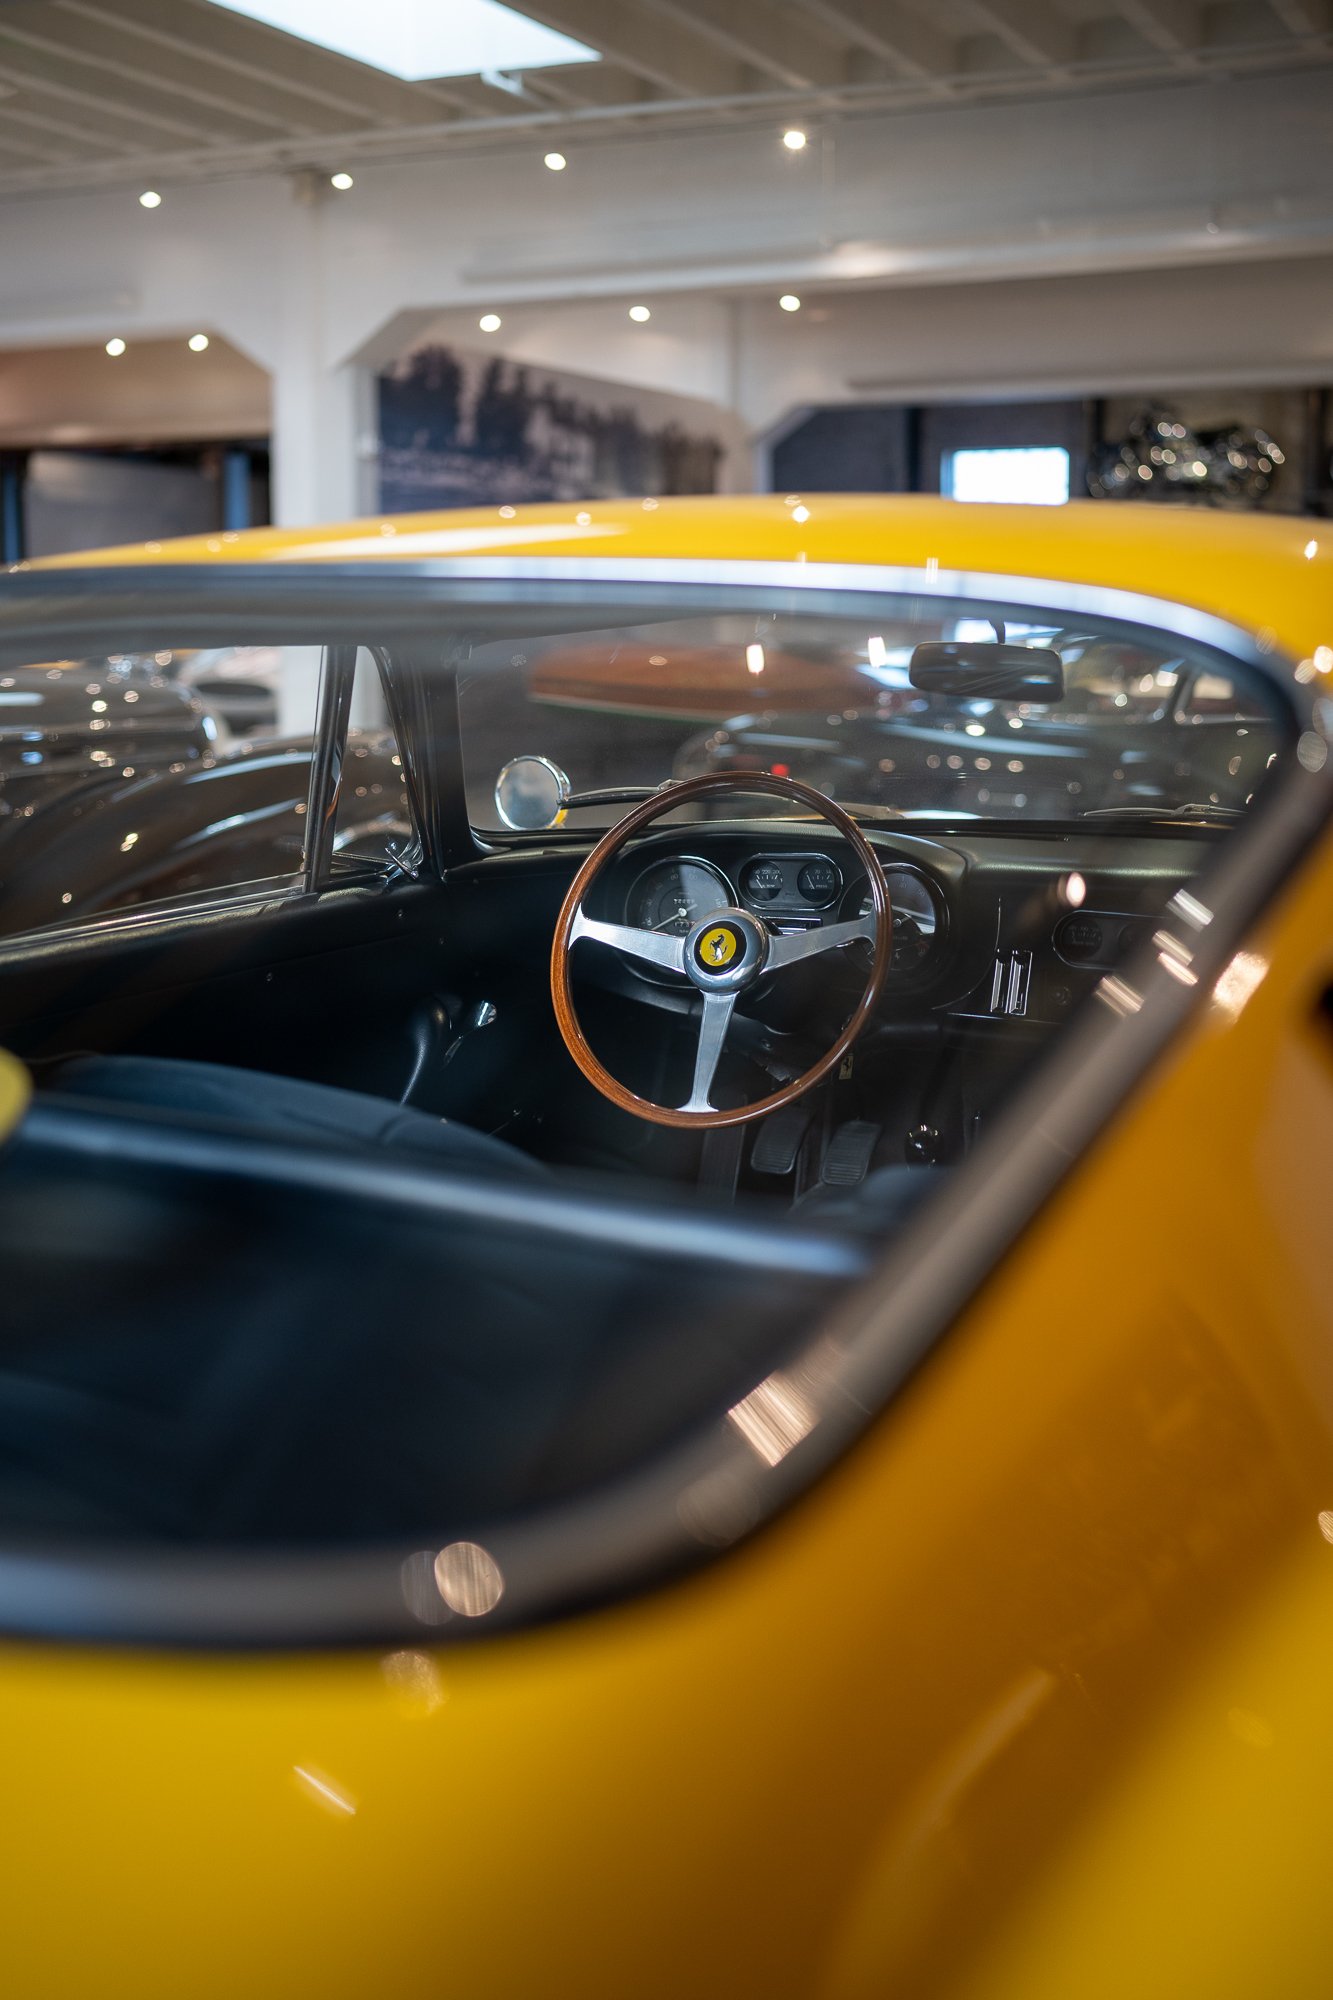 The interior of a yellow Ferrari 275 GTB owned by Bruce Meyer